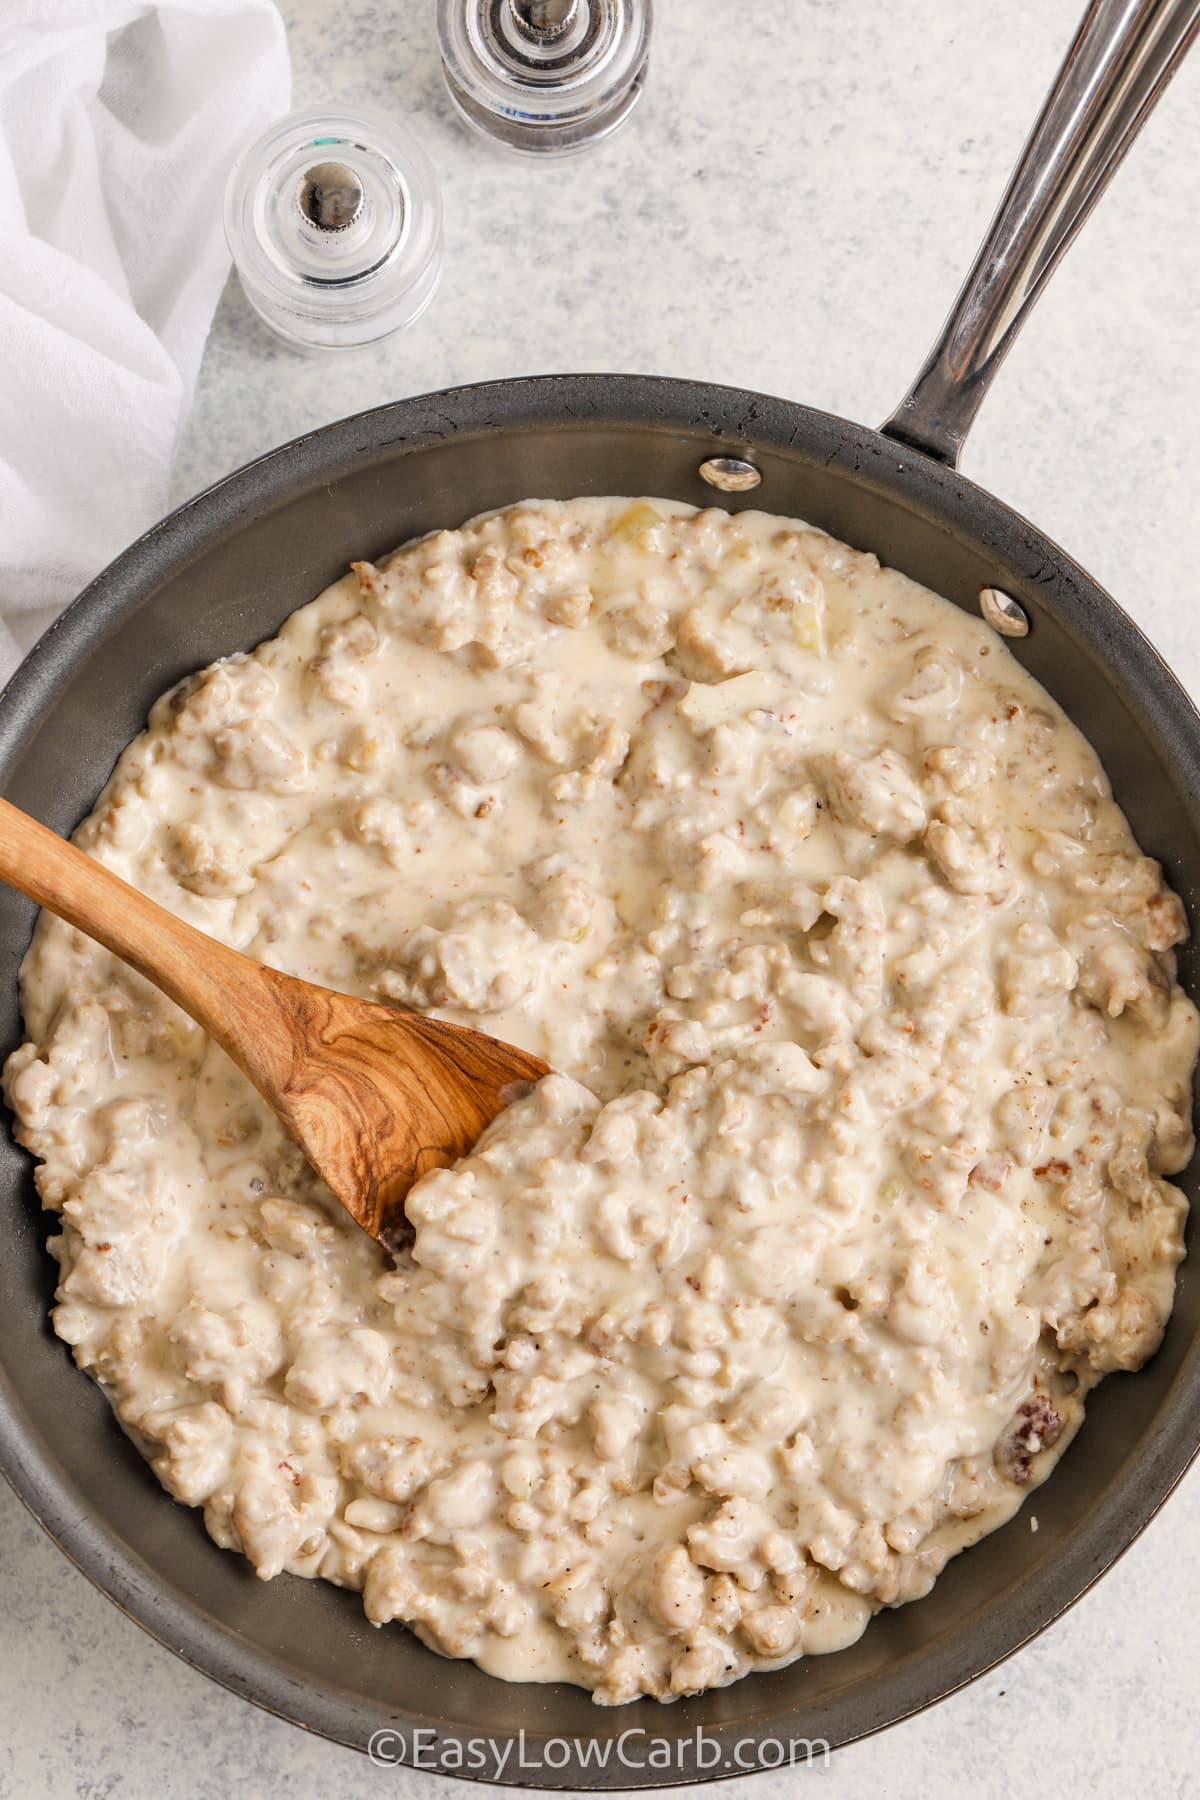 Keto Sausage Gravy in a pan with a wooden spoon